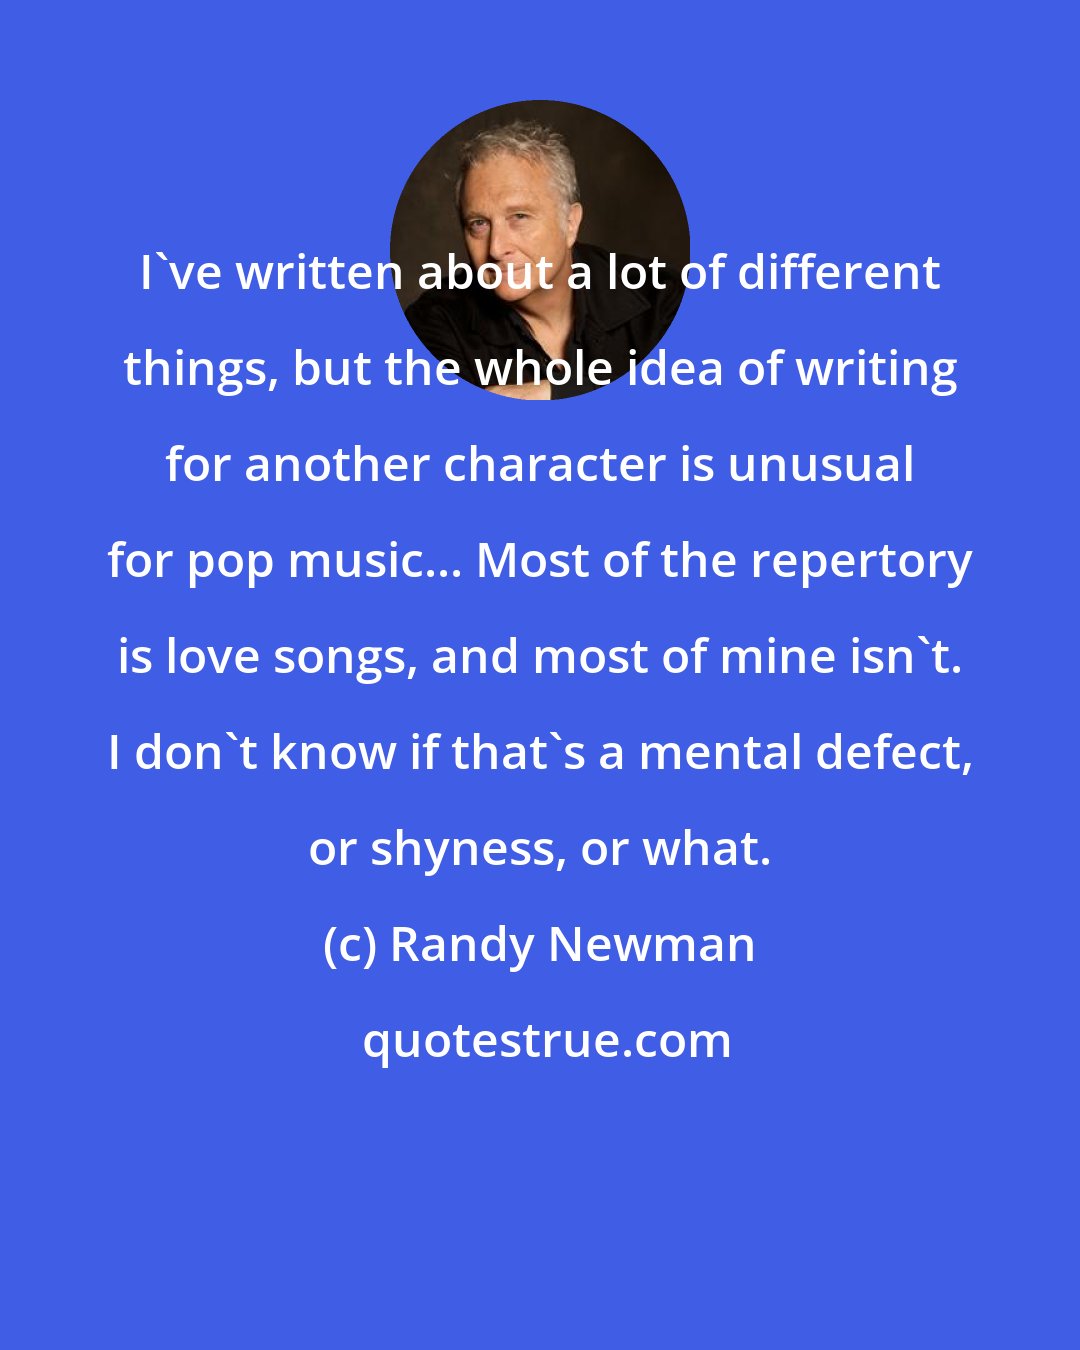 Randy Newman: I've written about a lot of different things, but the whole idea of writing for another character is unusual for pop music... Most of the repertory is love songs, and most of mine isn't. I don't know if that's a mental defect, or shyness, or what.